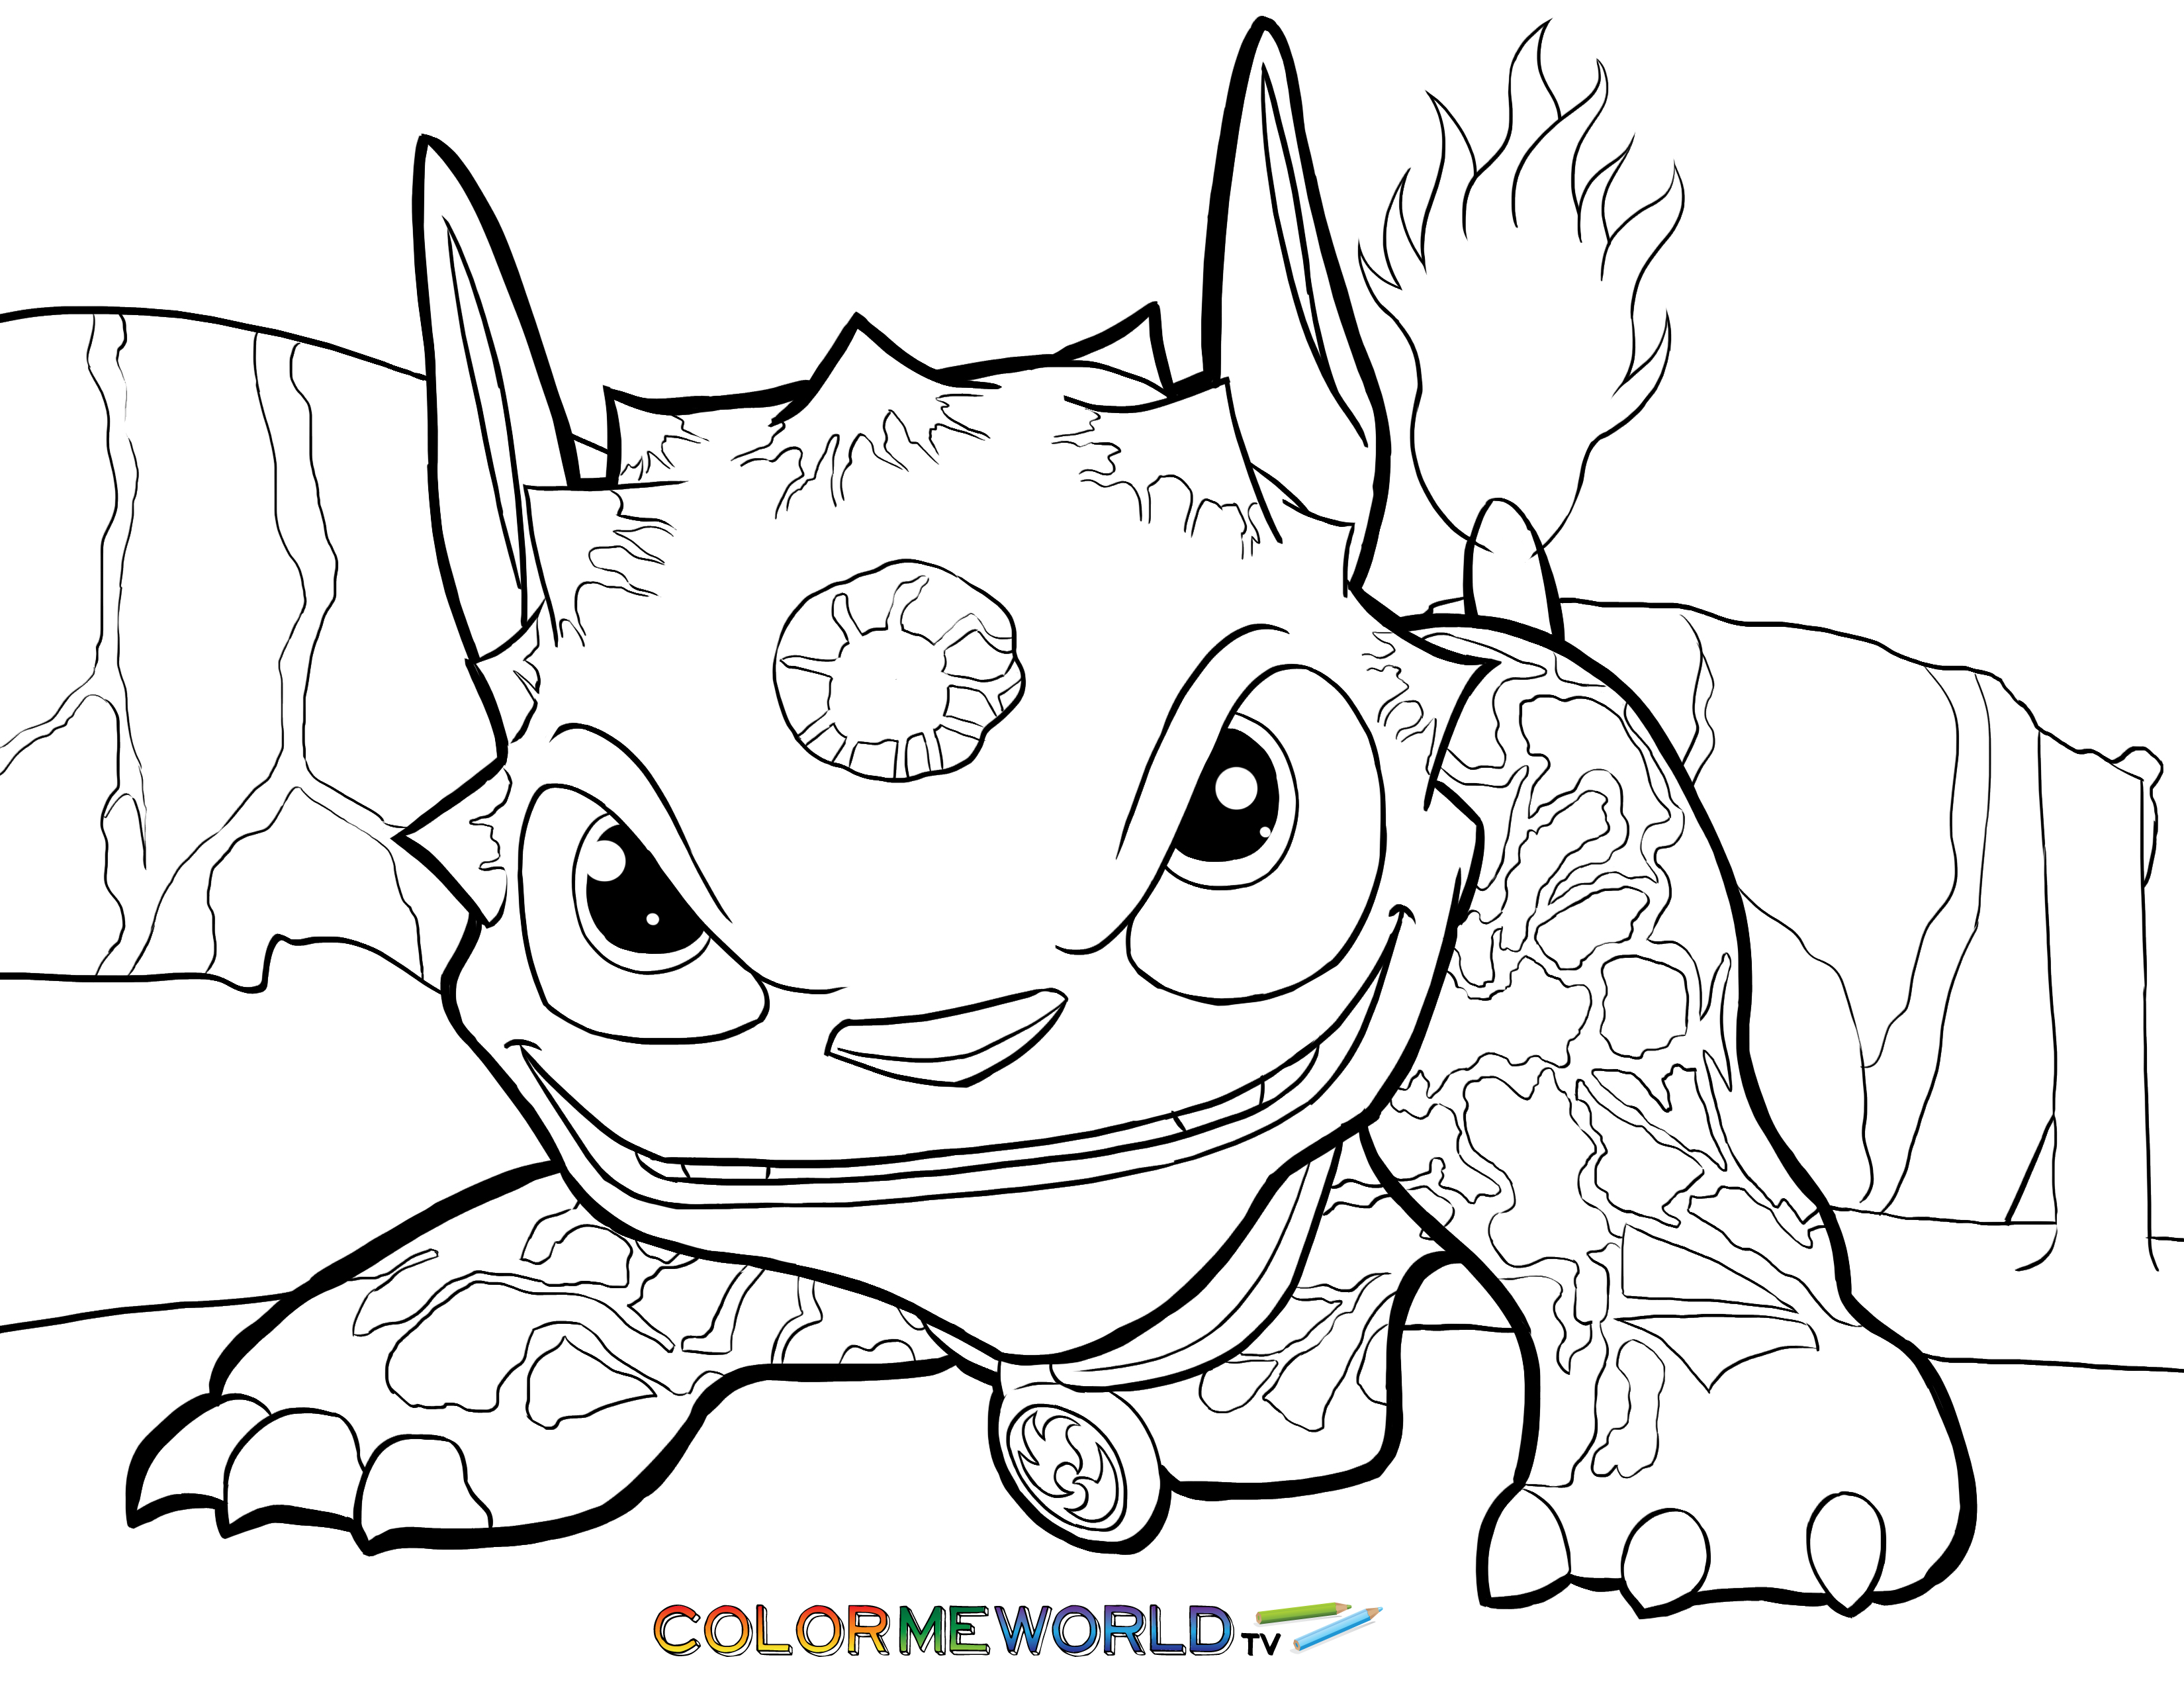 Skylander Coloring Page - Coloring Pages for Kids and for Adults